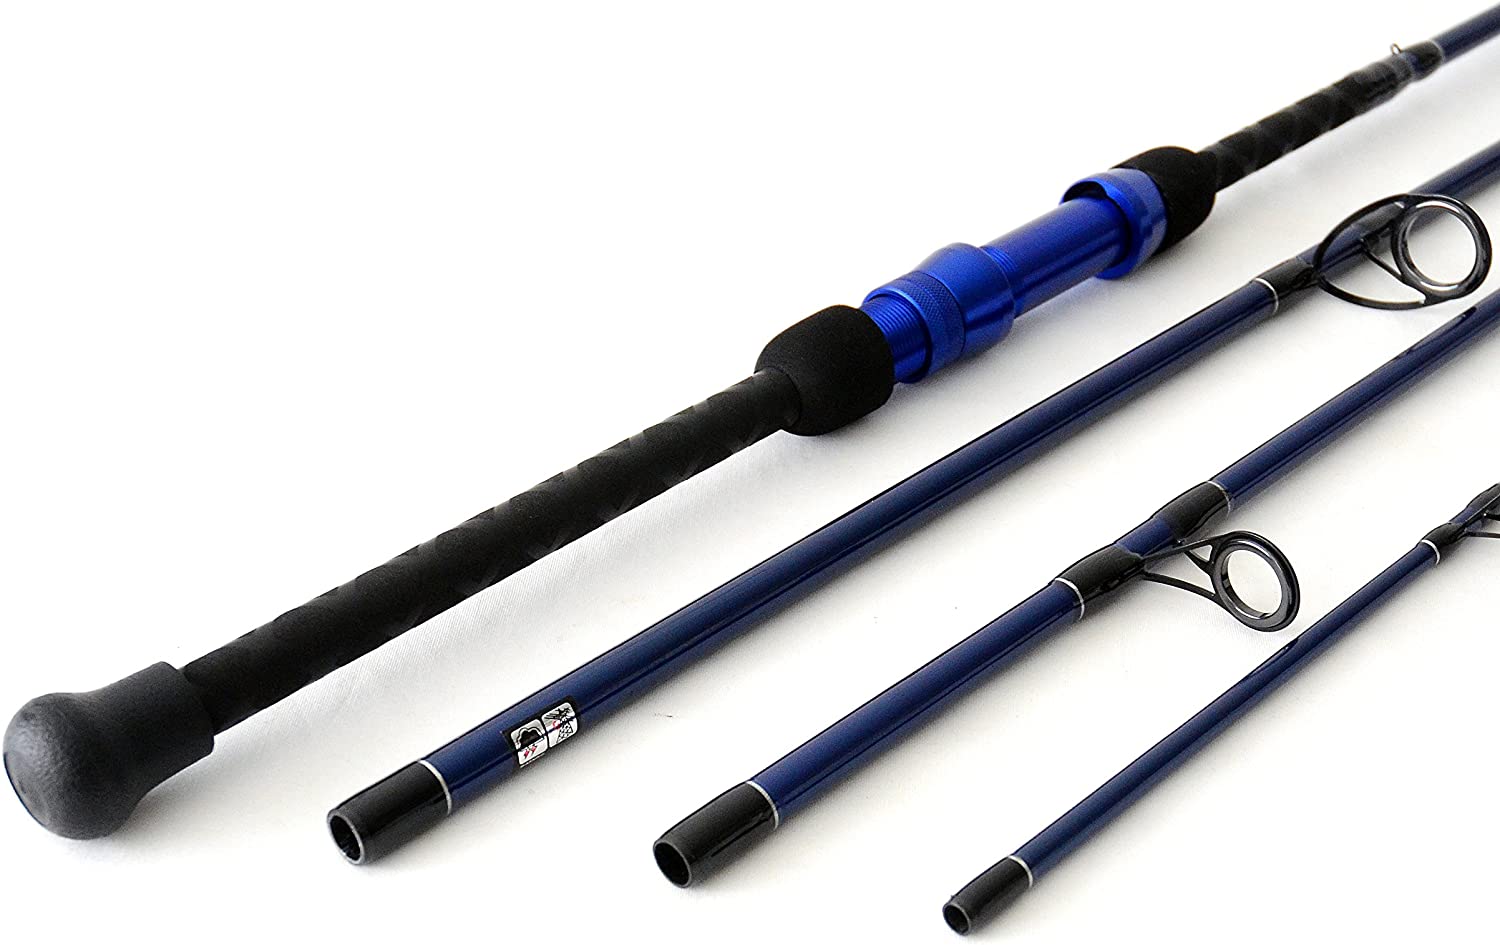 SANTIAM Fishing Rod Travel Rod 4 Piece 9 Feat 0 inches 12-25 Pound